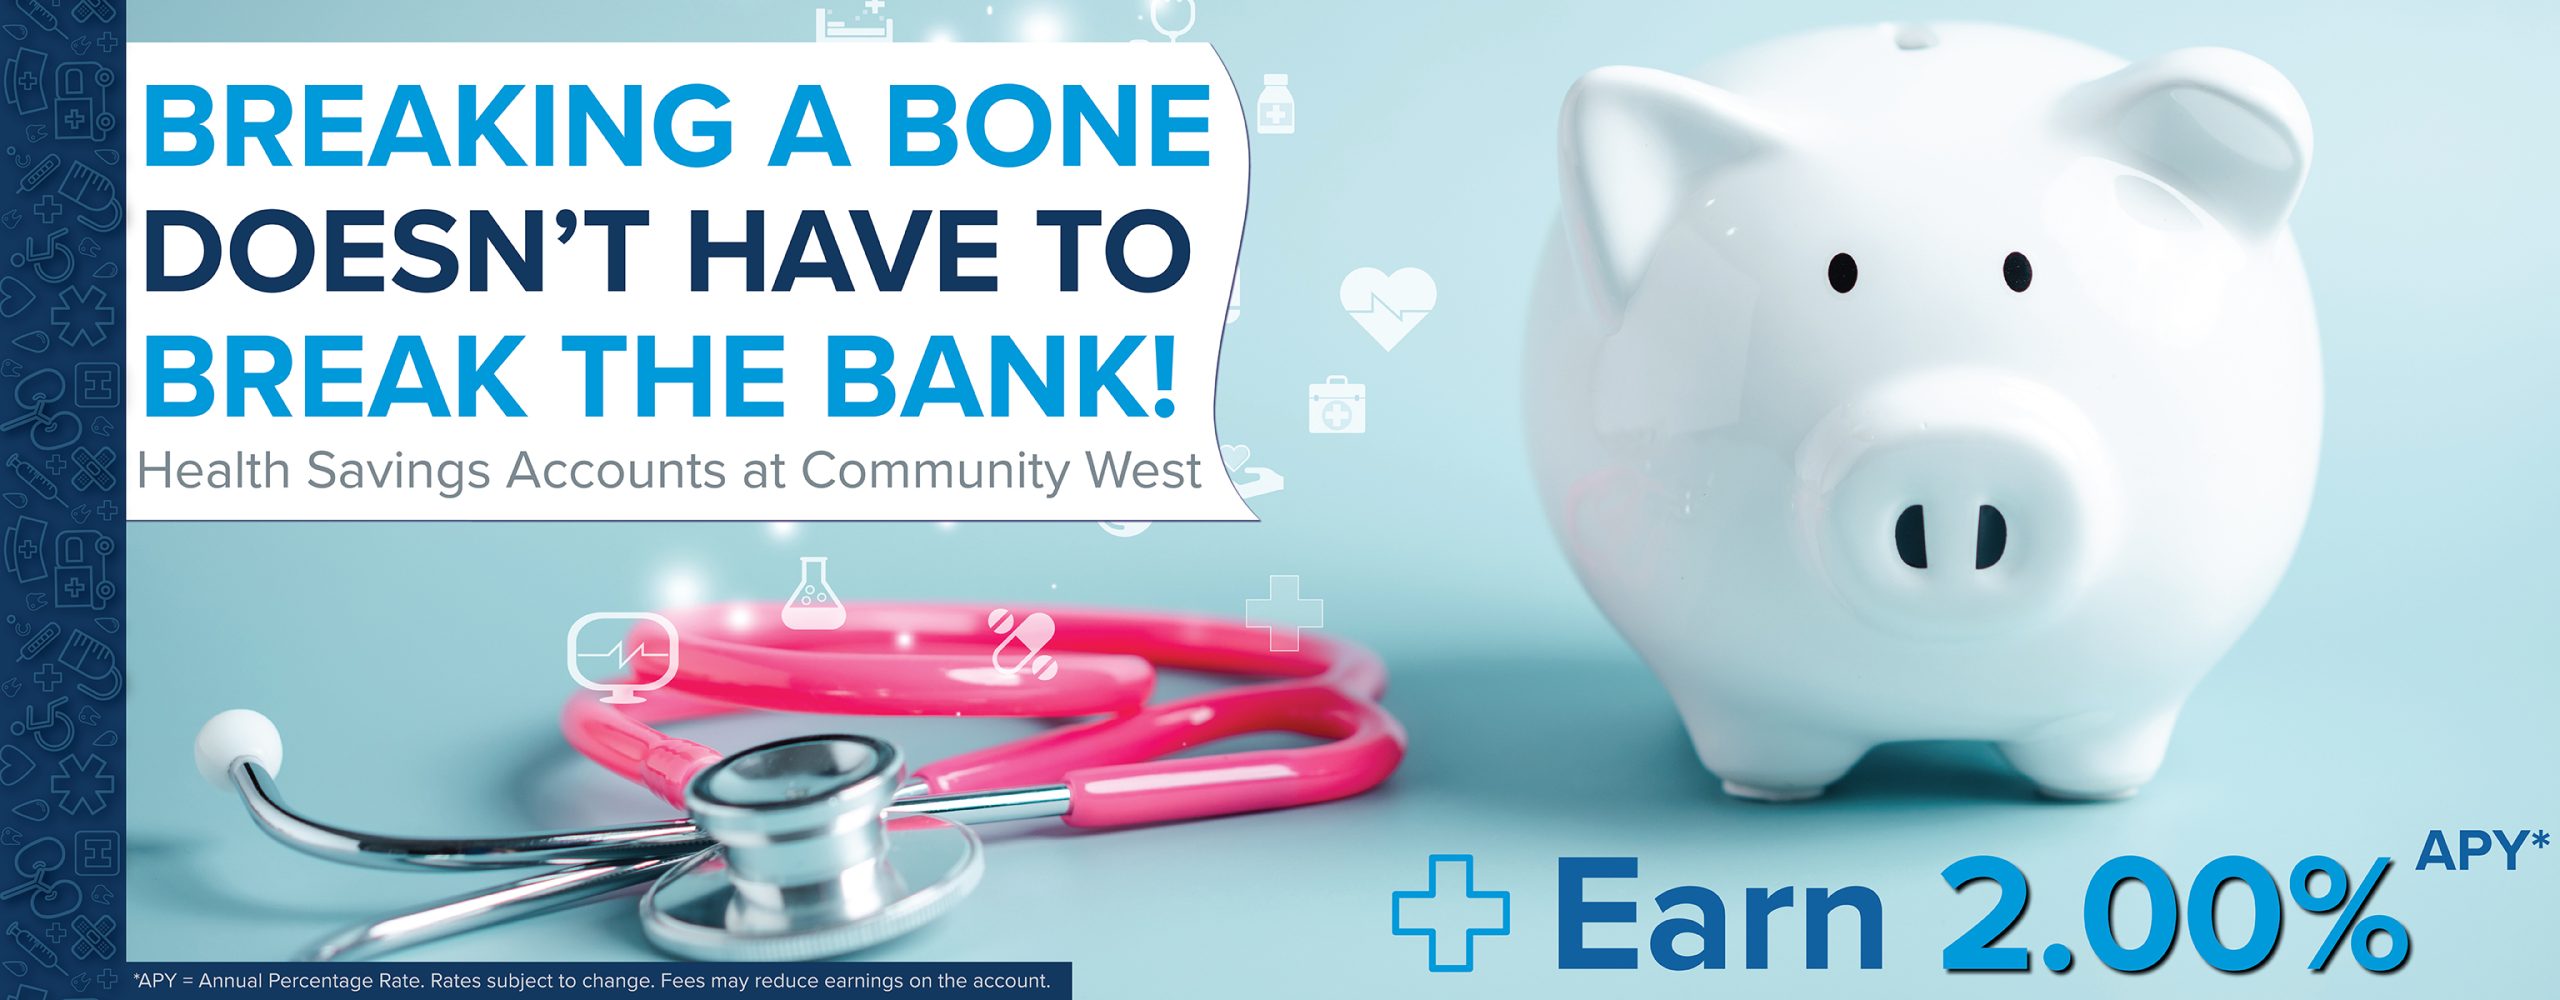 Image Description: White piggy bank with hot pink stethoscope to the left on a light blue background. Text Description: Breaking a bone doesn't have to break the bank! Health Savings Accounts at Community West. Earn 2.00% APY*